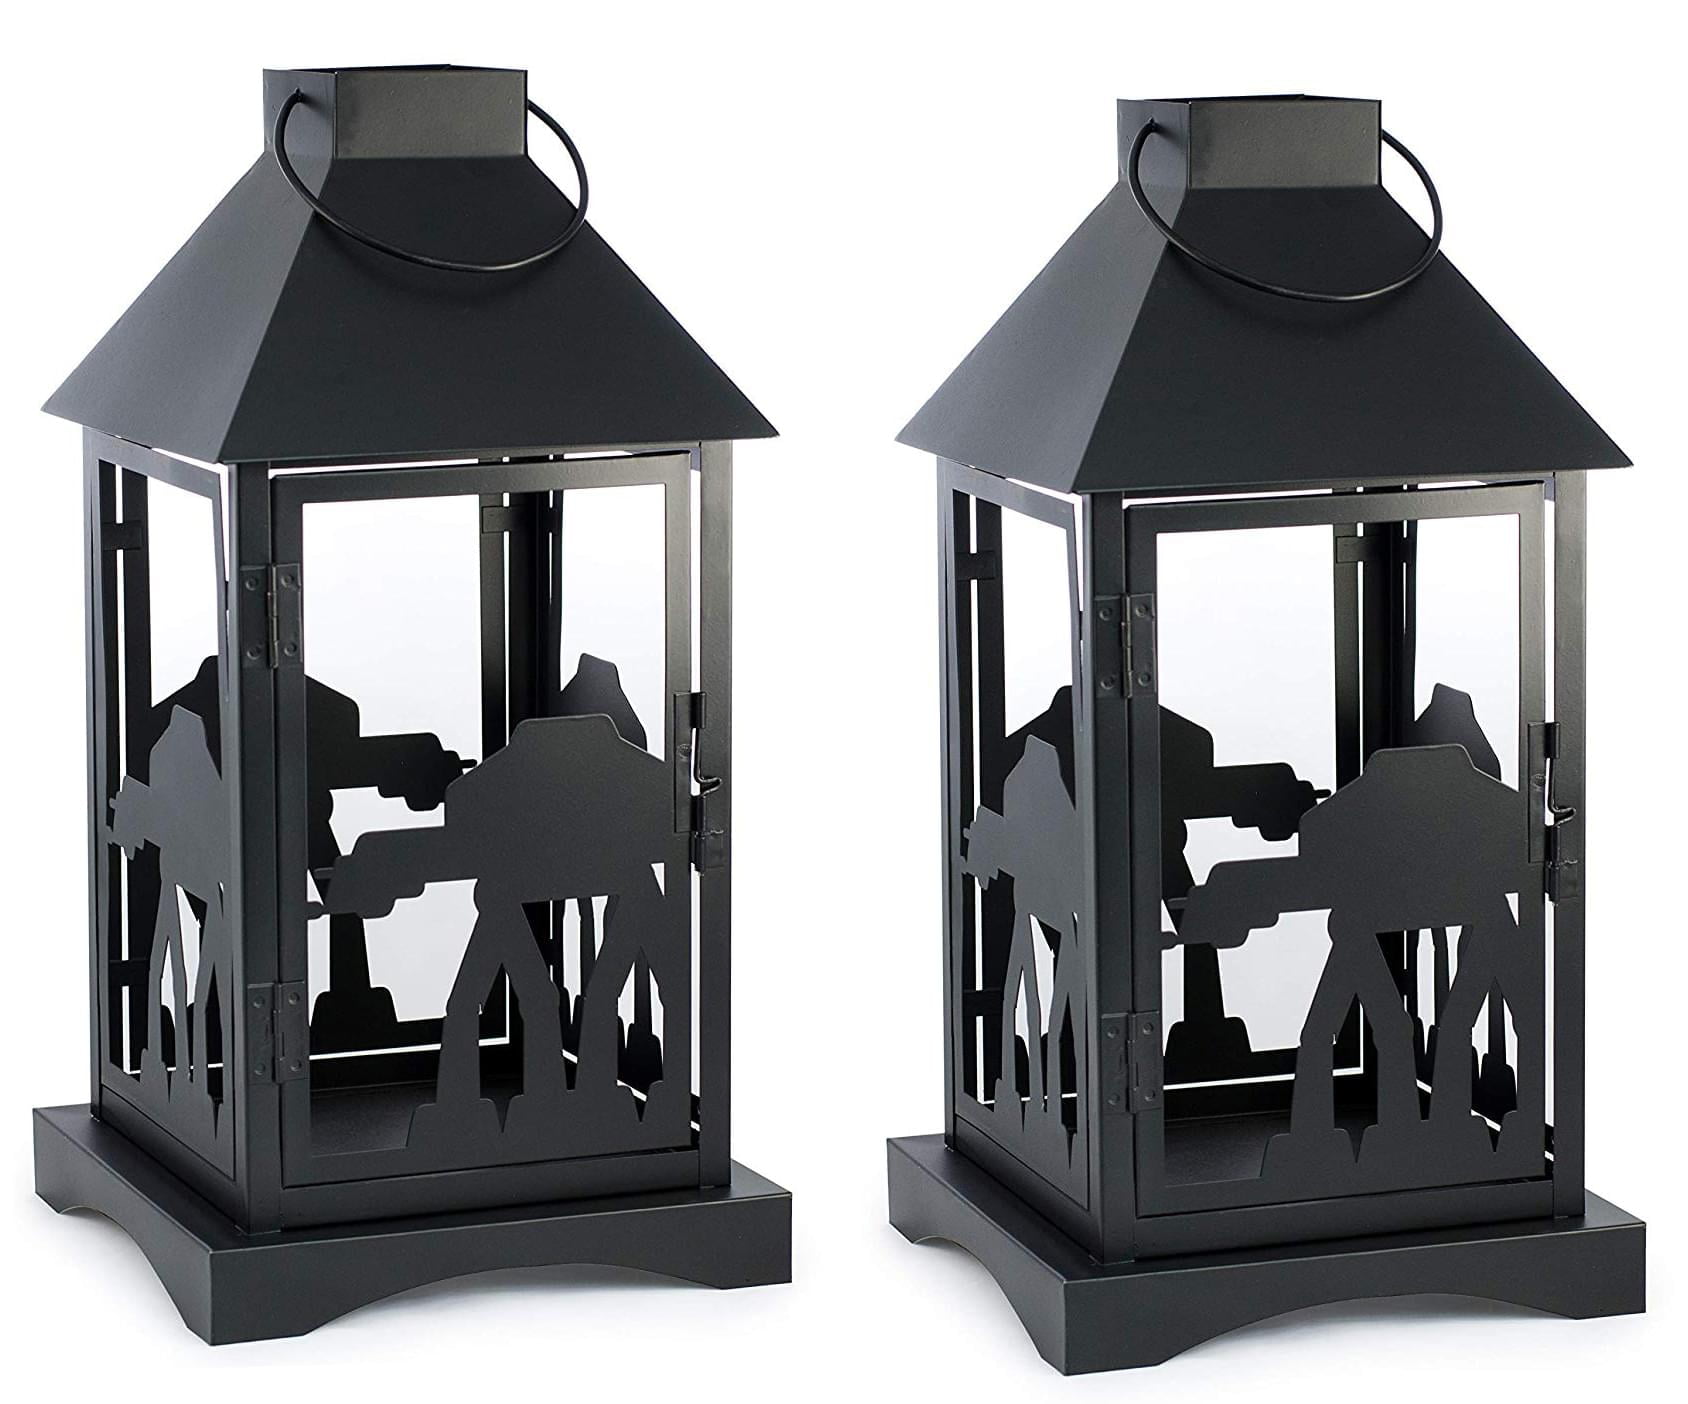 Team Sports America Light Up Solar Garden Lantern for Los Angeles Dodgers Fans 4.4 x 10 x 4.4 Inches 